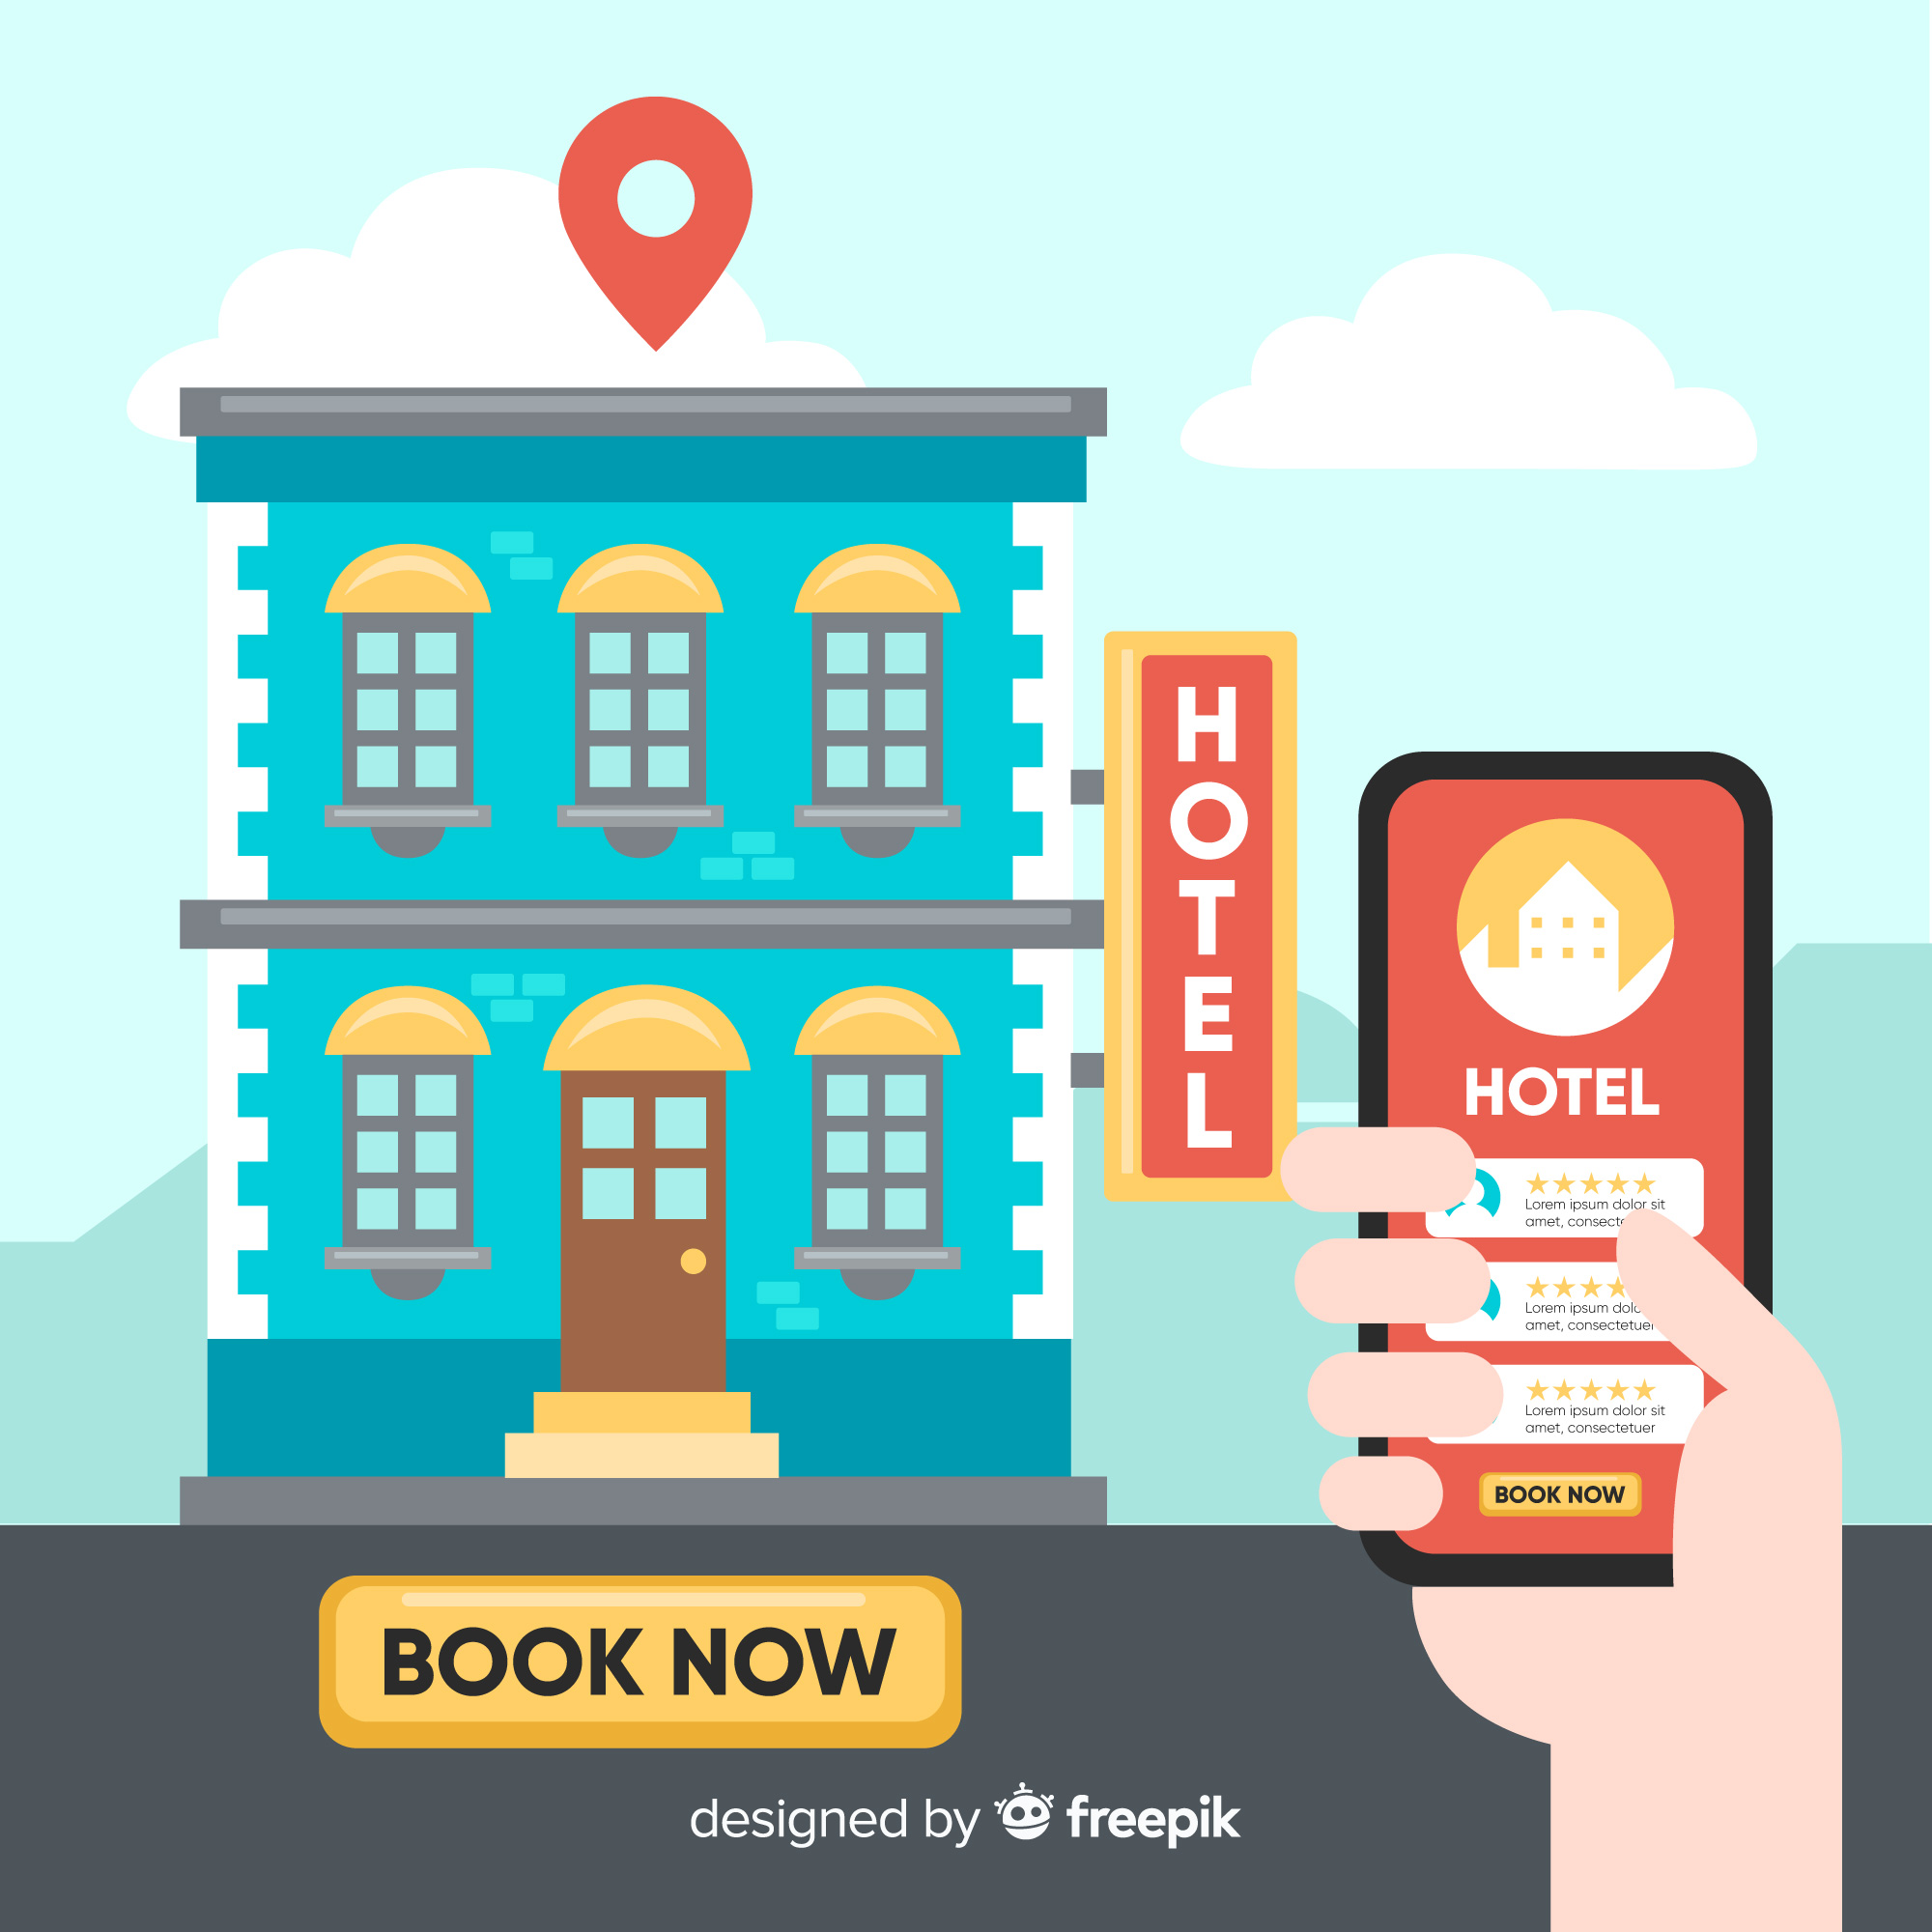 Hotel Booking Apps in India | Best Hotel Booking Apps in India | App